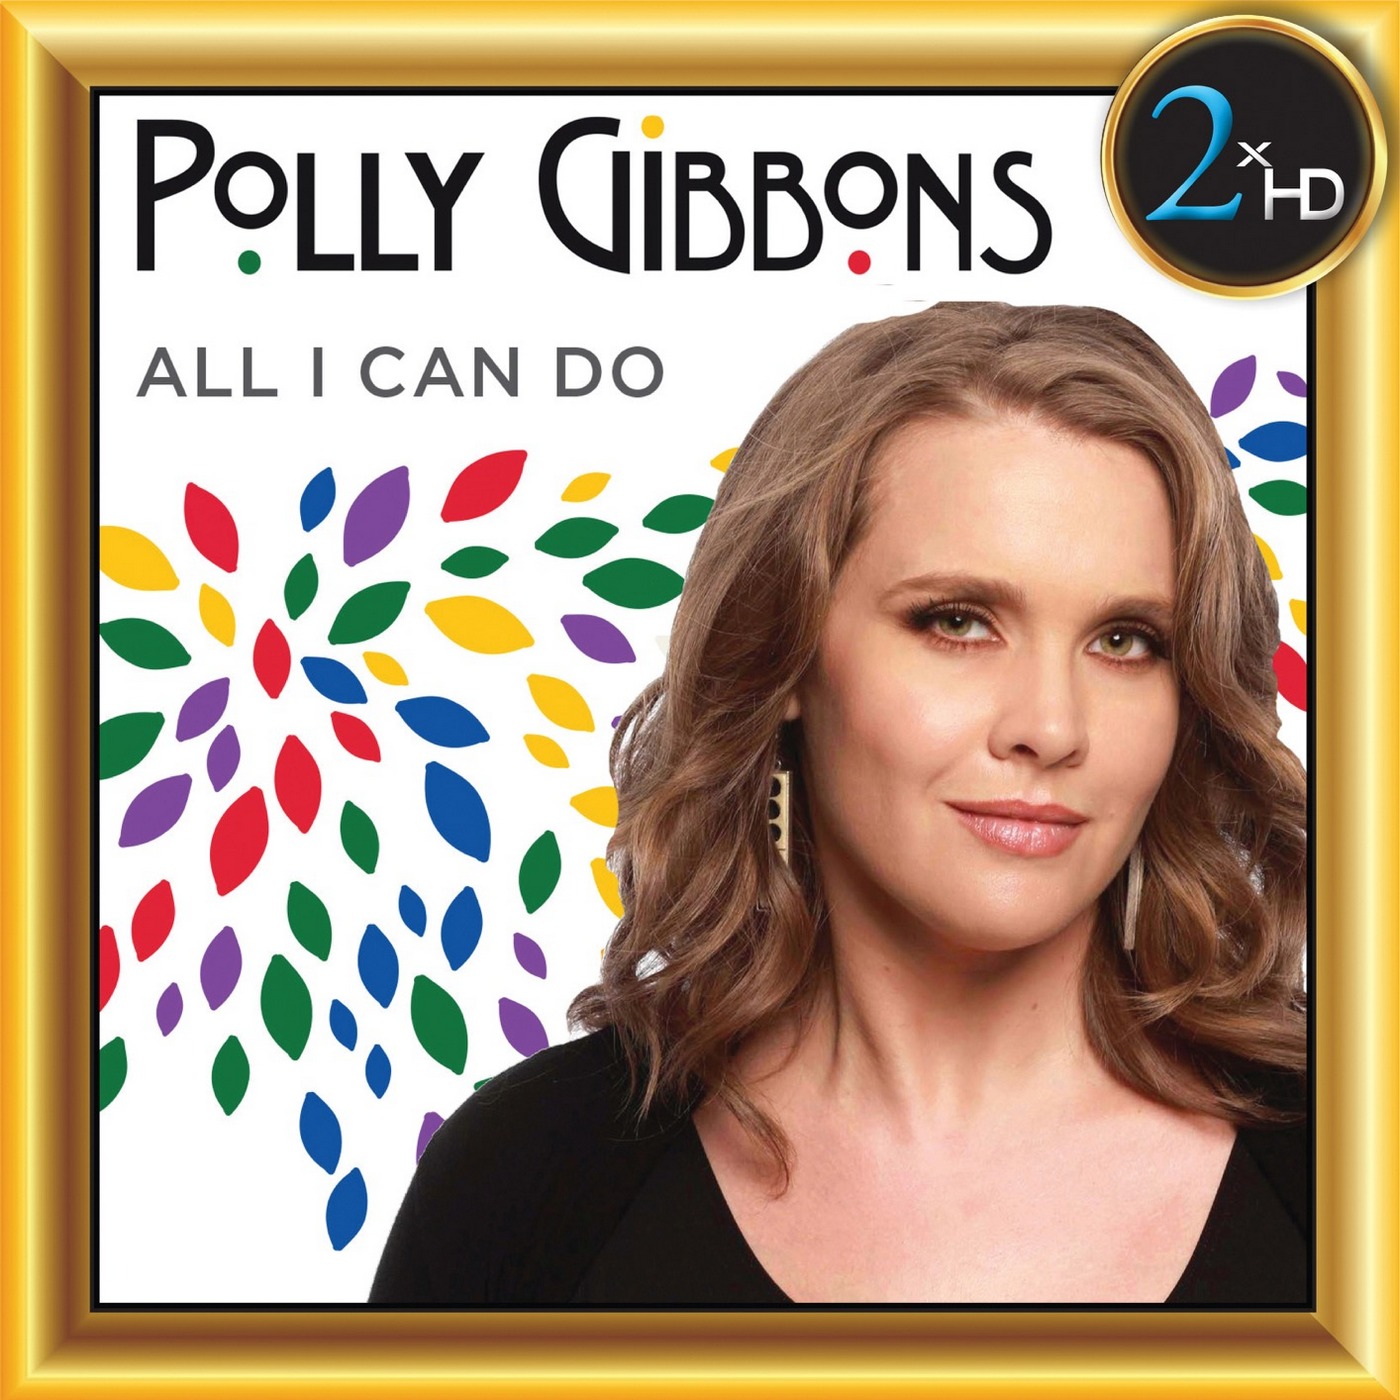 Polly Gibbons - All I Can Do (2019) [FLAC 24bit/192kHz]